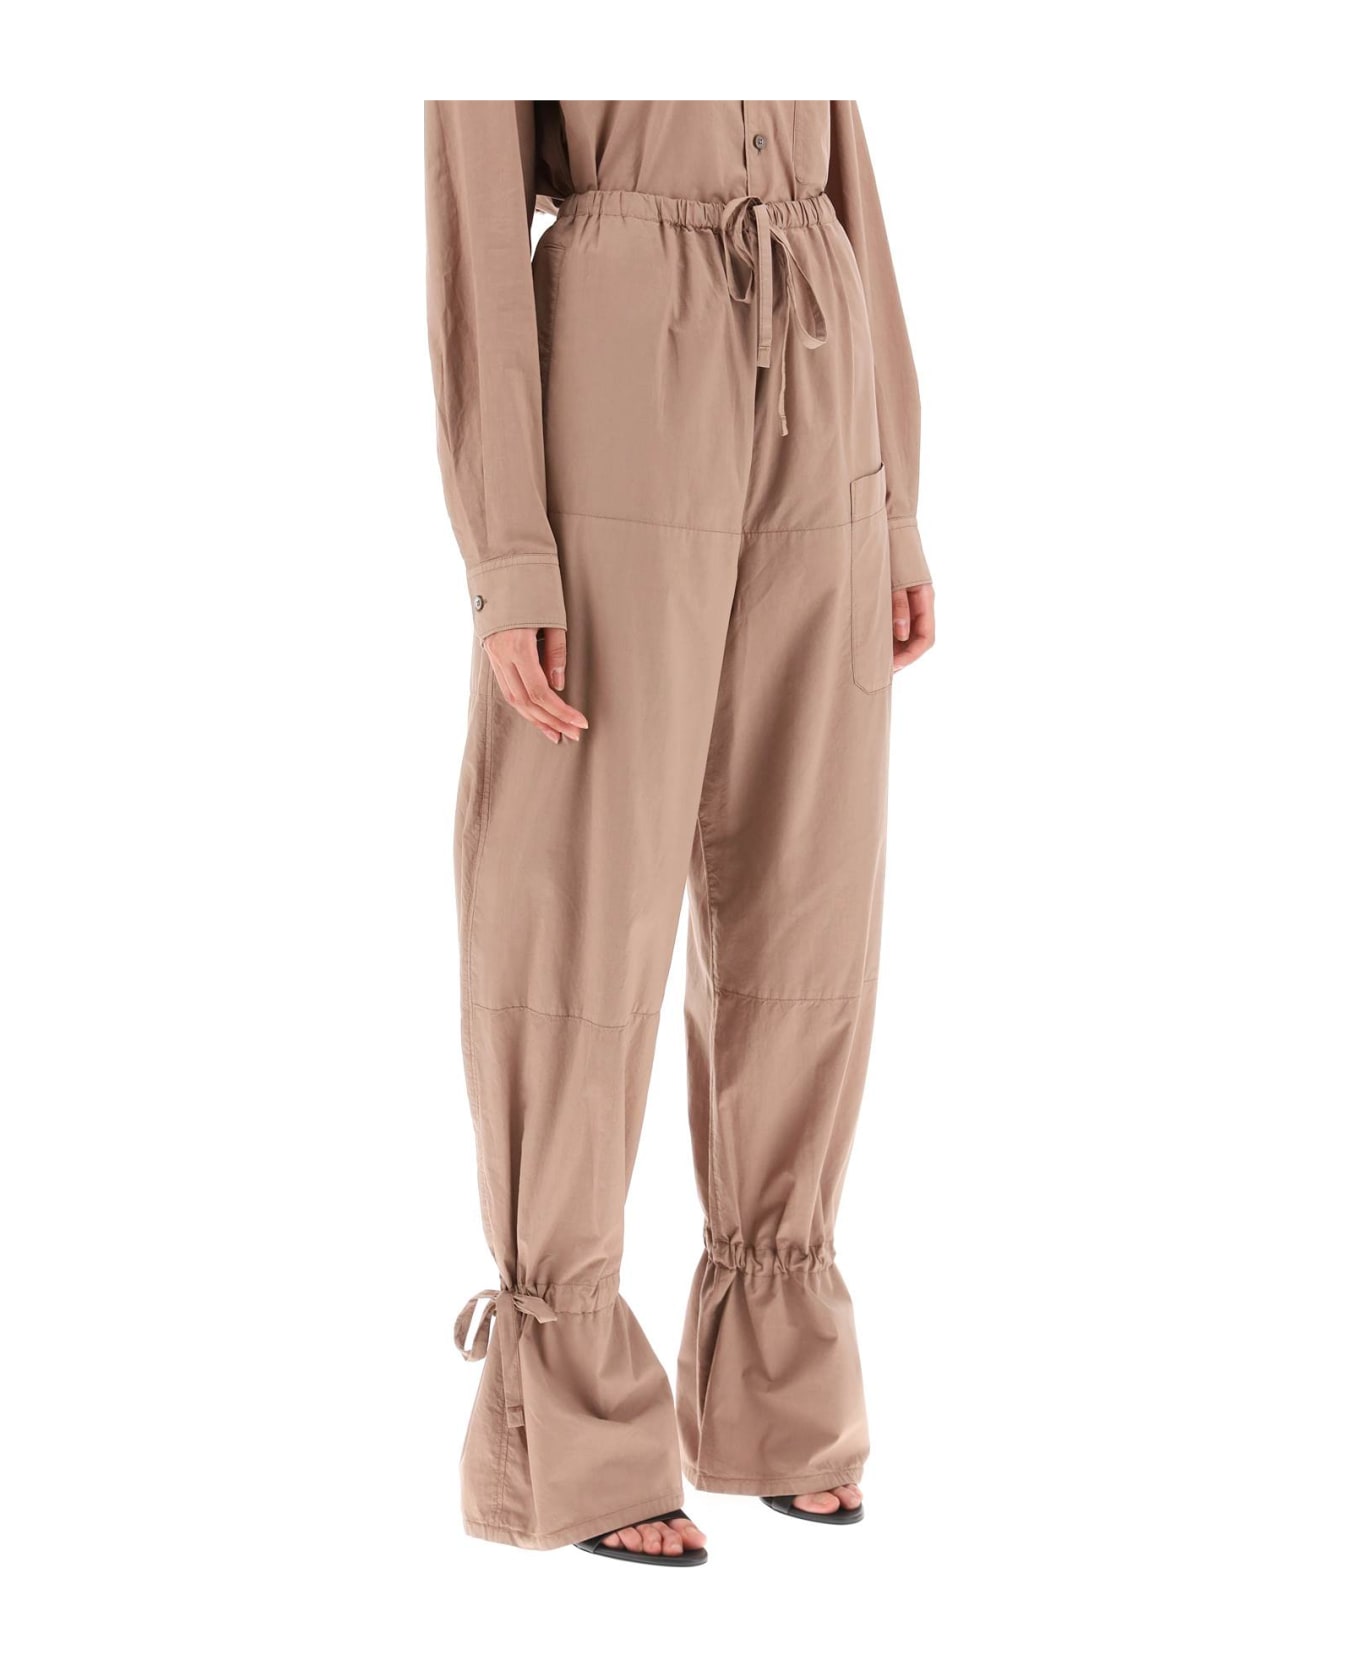 Lemaire 'parachute' Pants - CAPPUCCINO (Brown) ボトムス